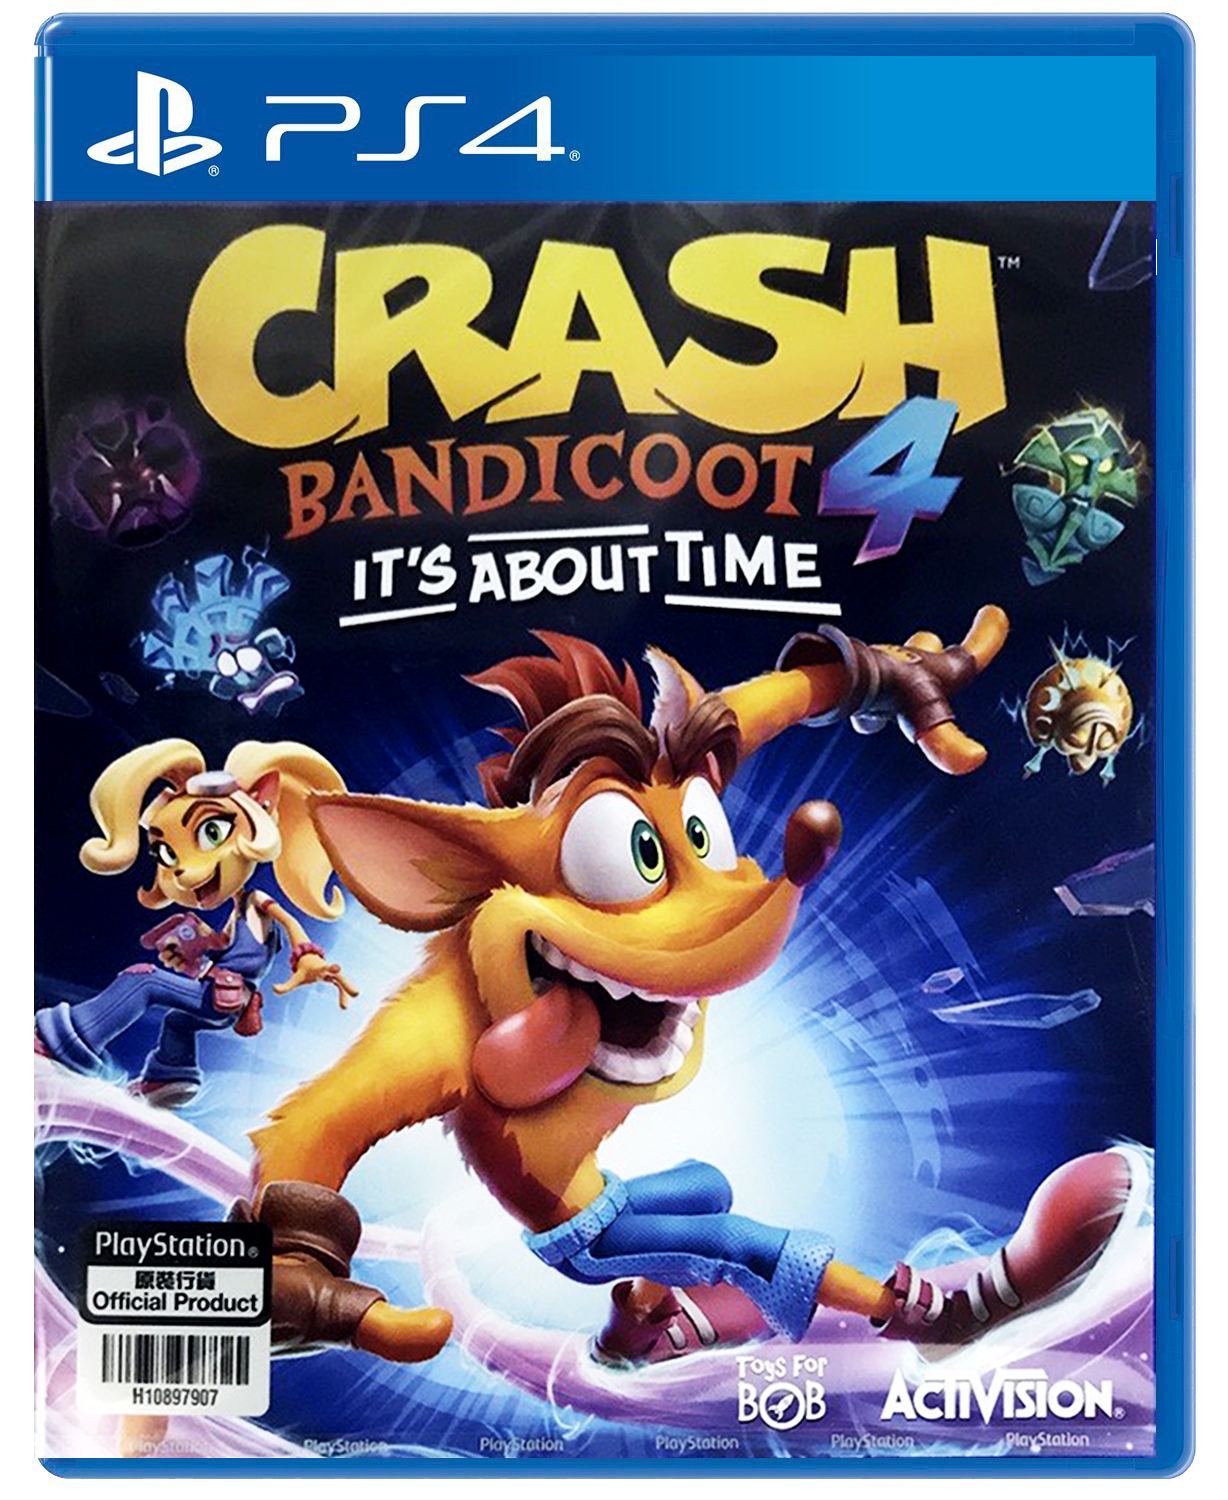 Crash Bandicoot 4: It's About Time (English) for PlayStation 4